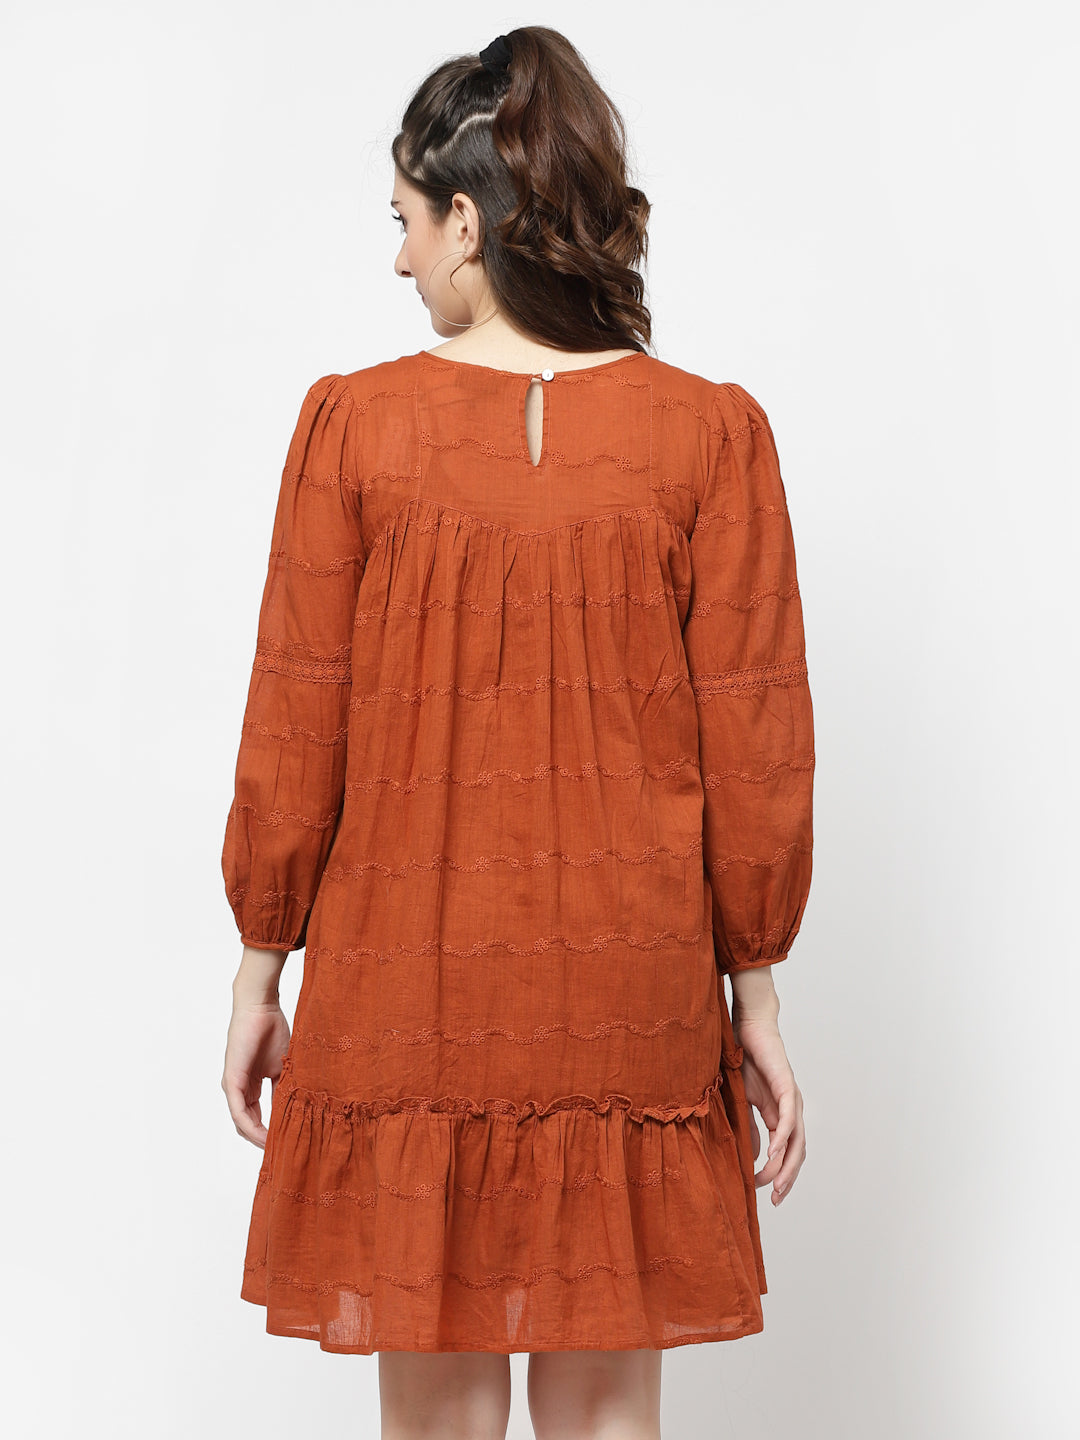 Terquois A-line Casual Dress Emblished with Lace Has Round Neck Dresses Terquois Klothing   